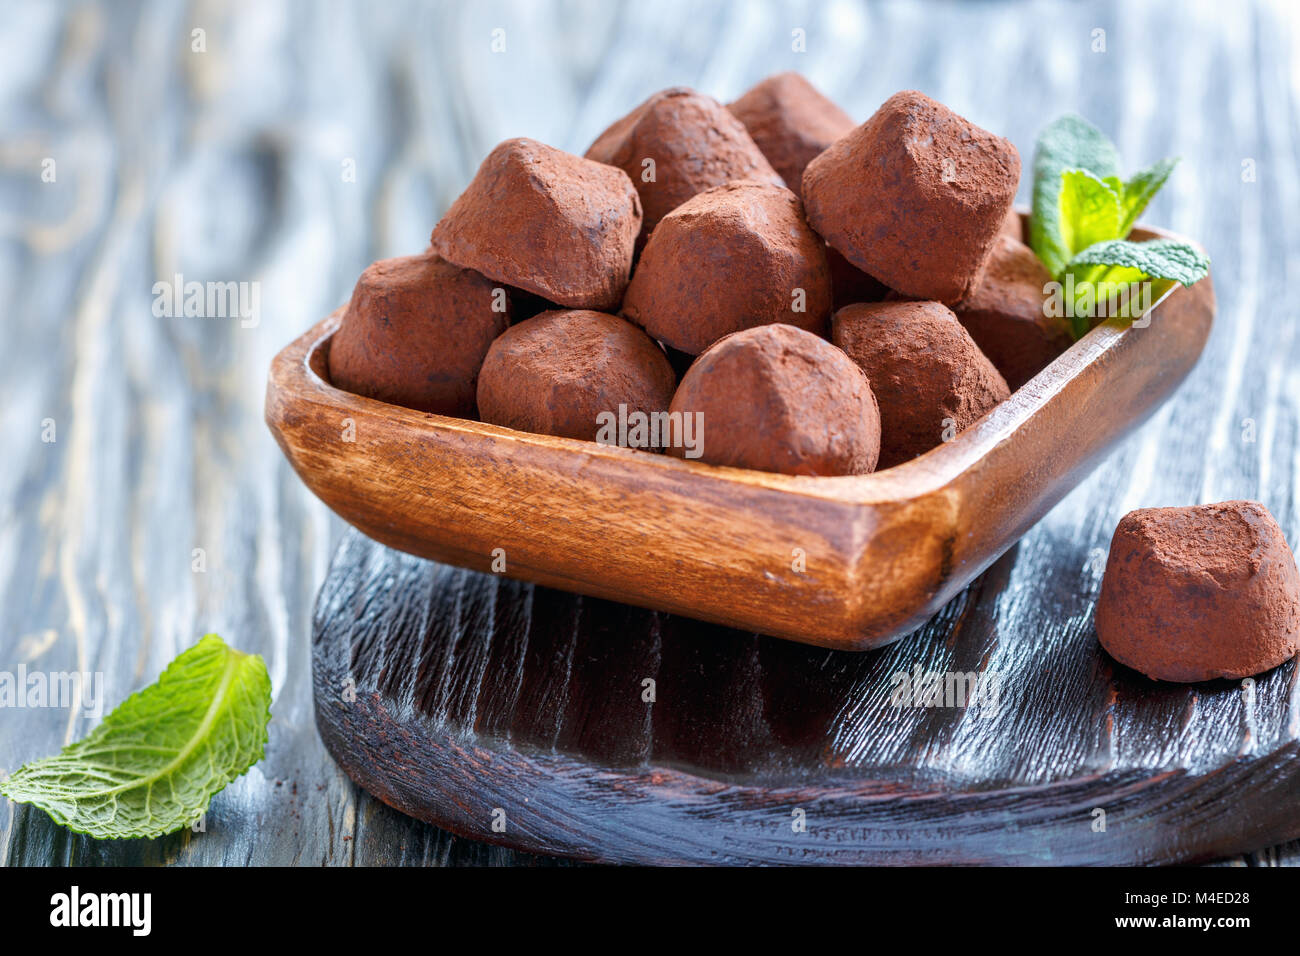 Candy of chocolate in cocoa powder. Stock Photo